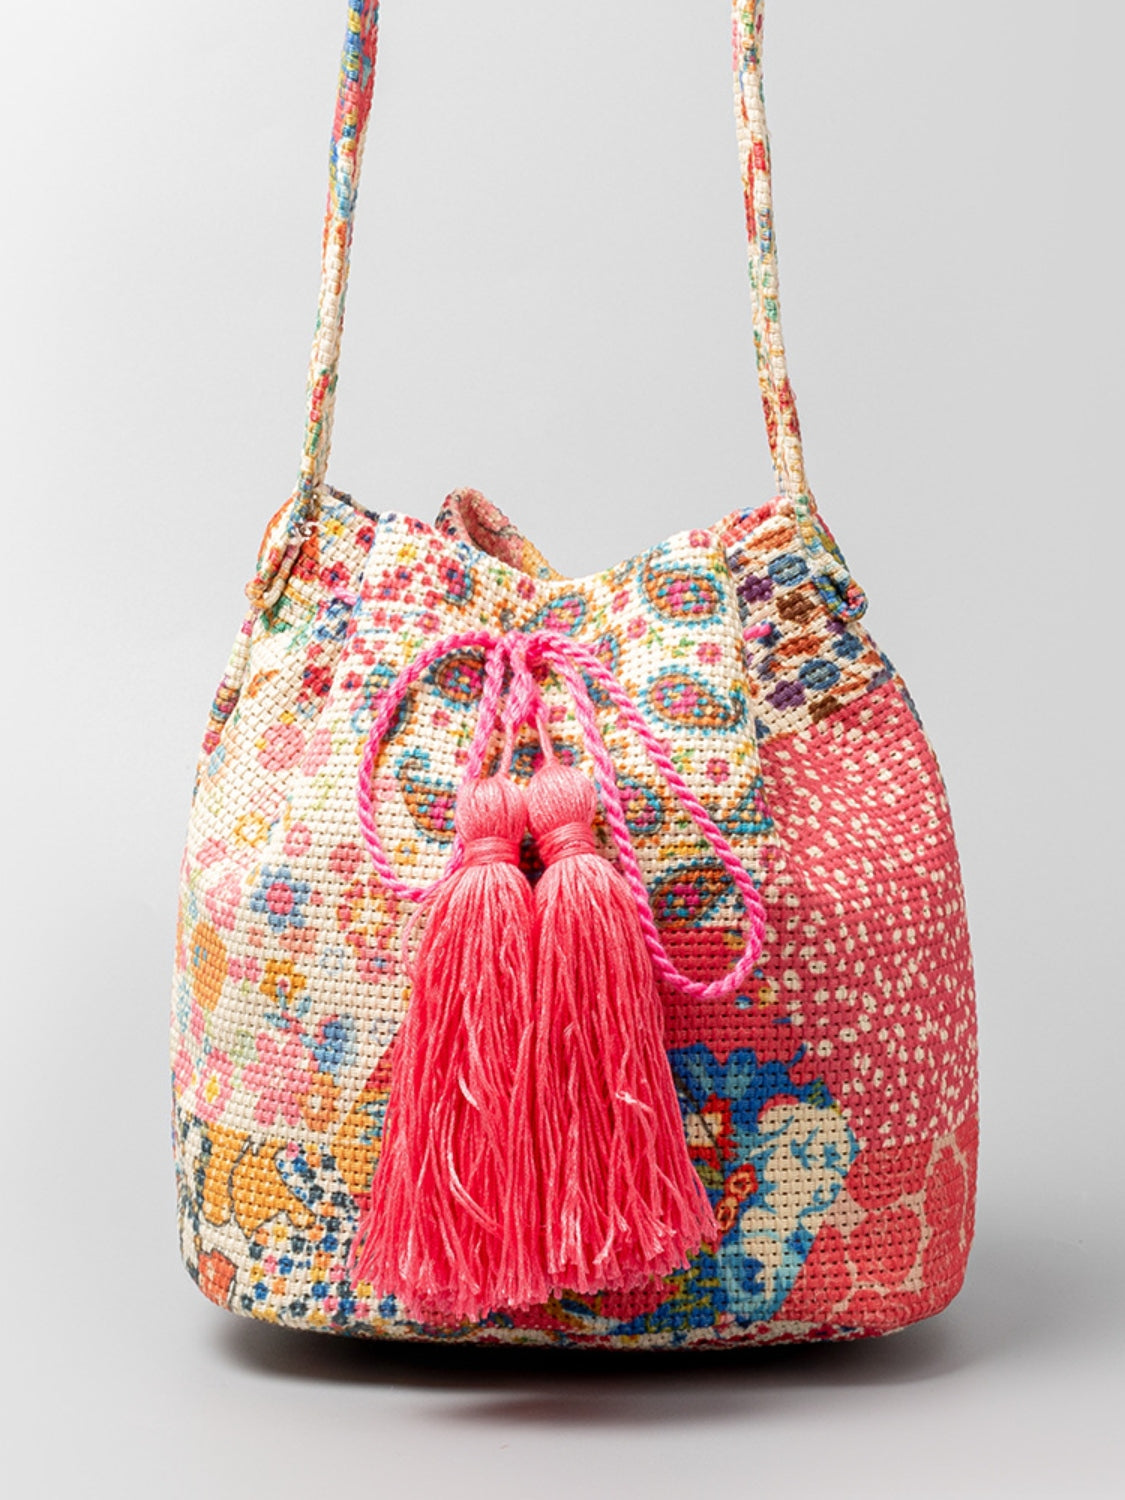 Pink and cream patterned bucket bag with drawstring closure and tassels.